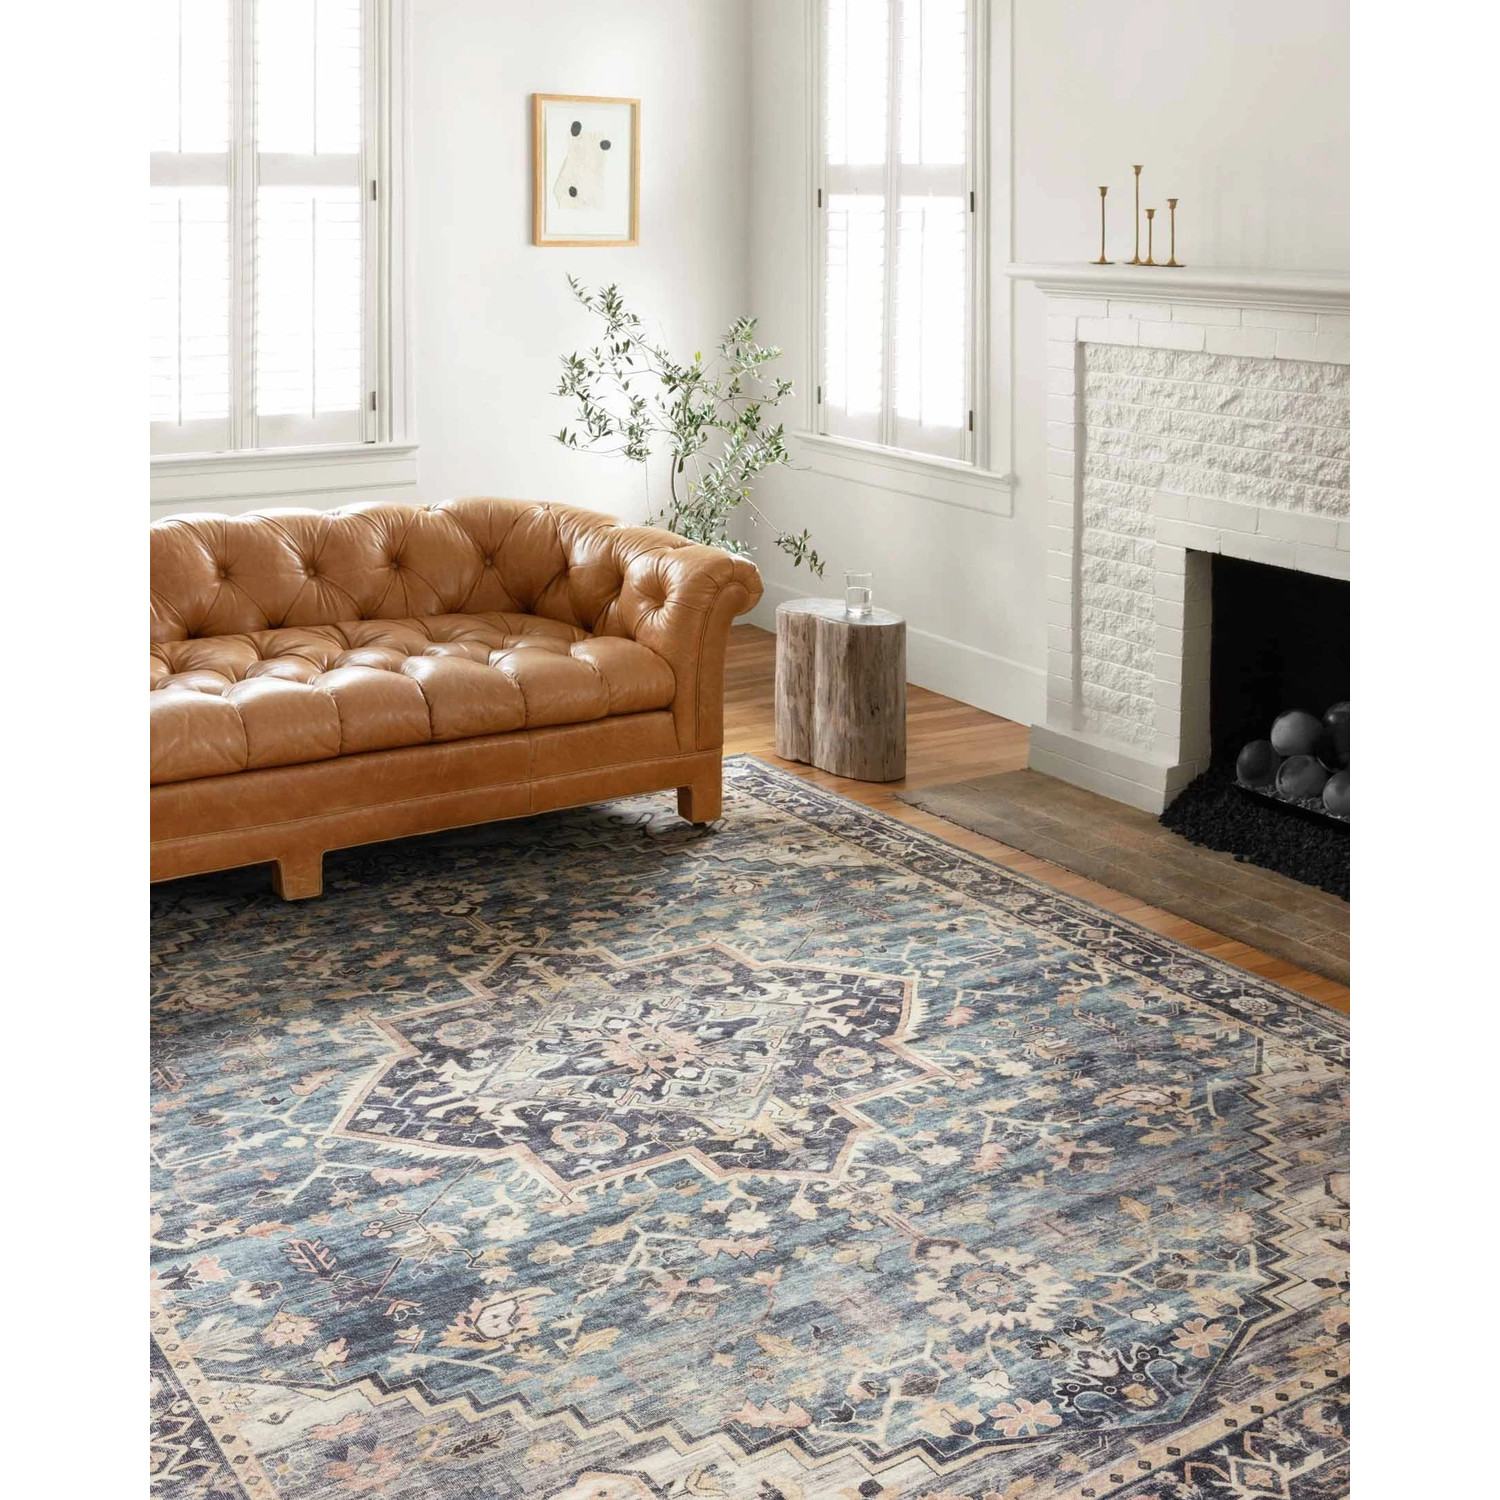 Hathaway Rug by Loloi - HTH-01 Navy/Multi-Loloi Rugs-Blue Hand Home